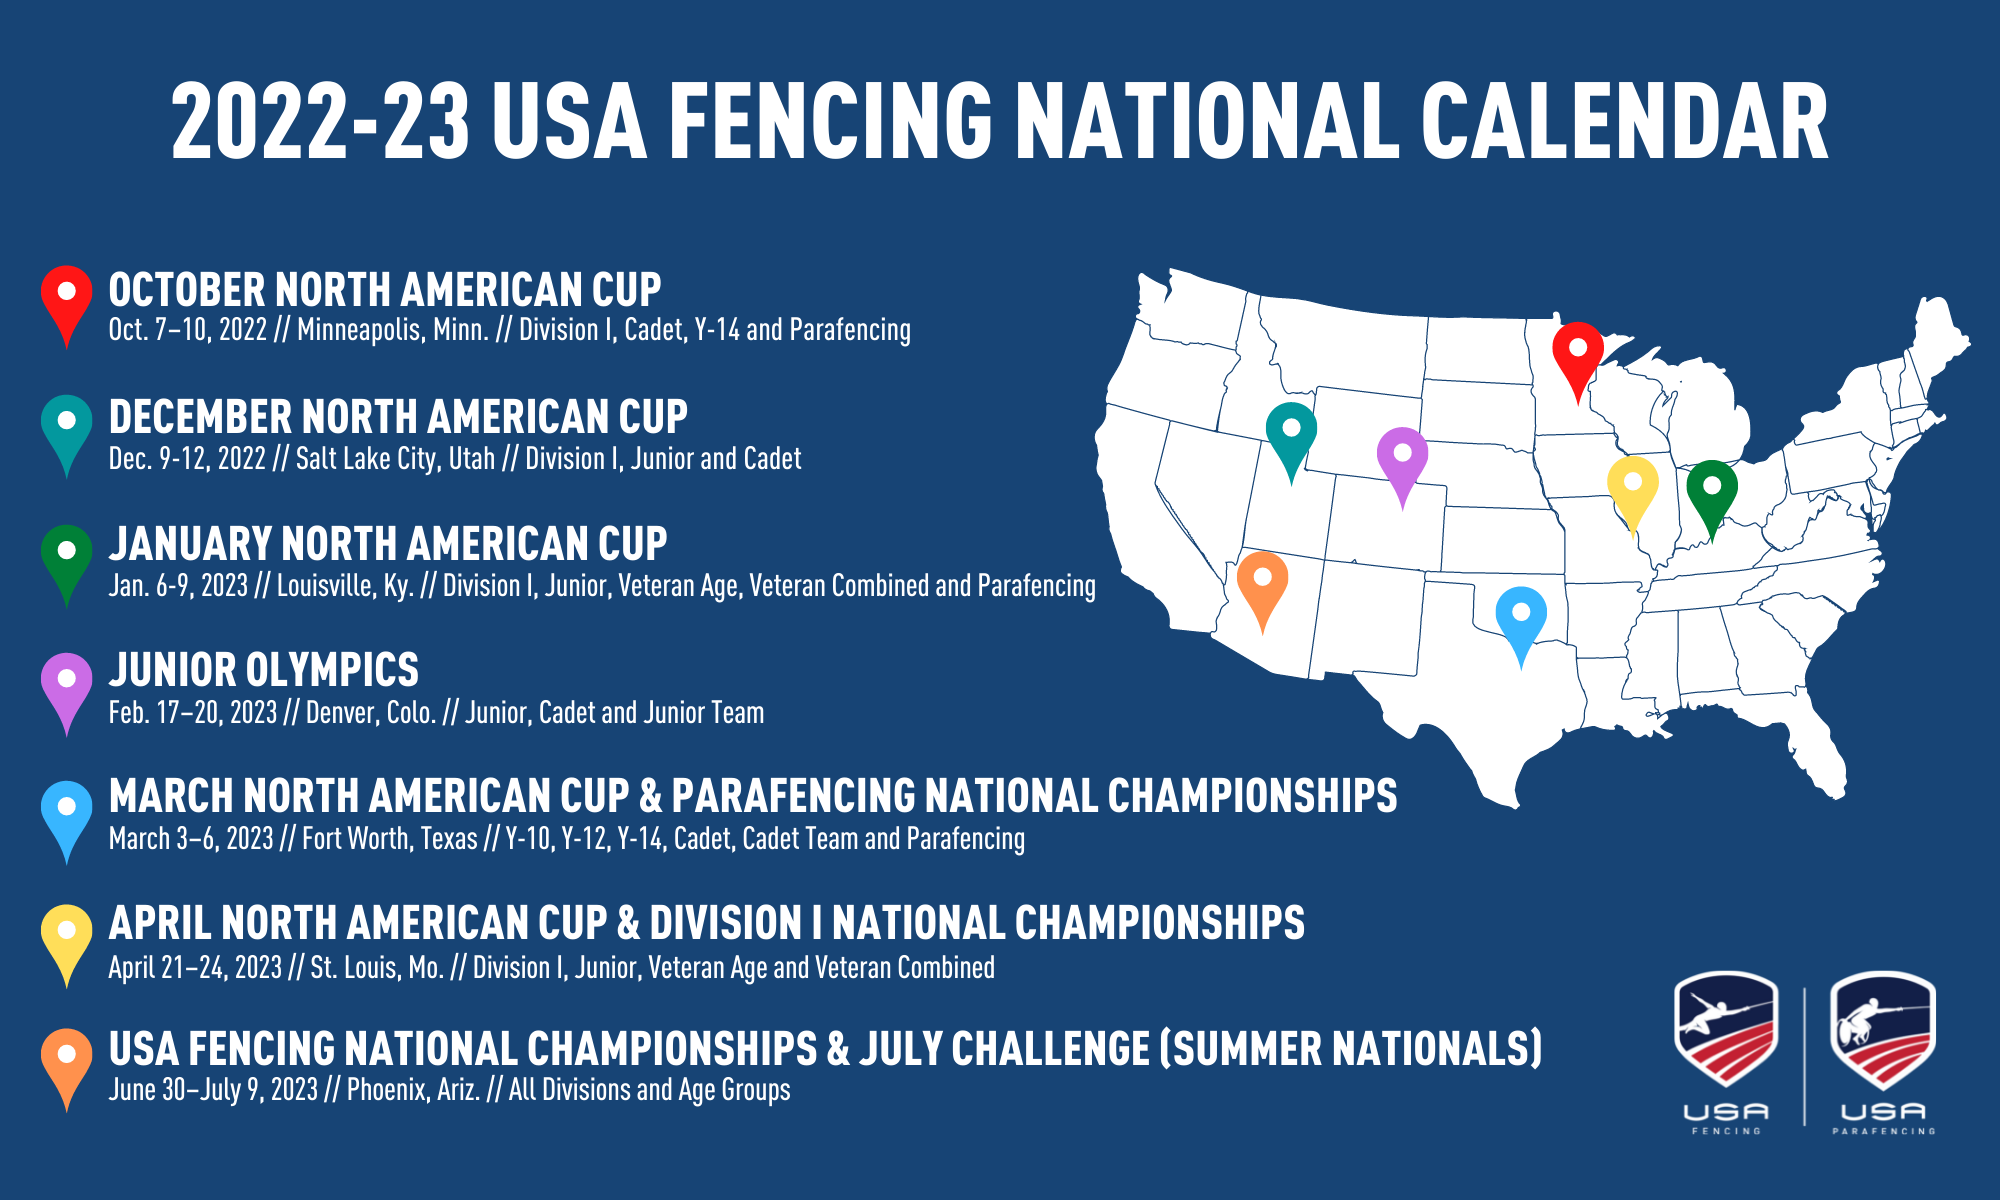 202223 USA Fencing Schedule Announced SoCal Division